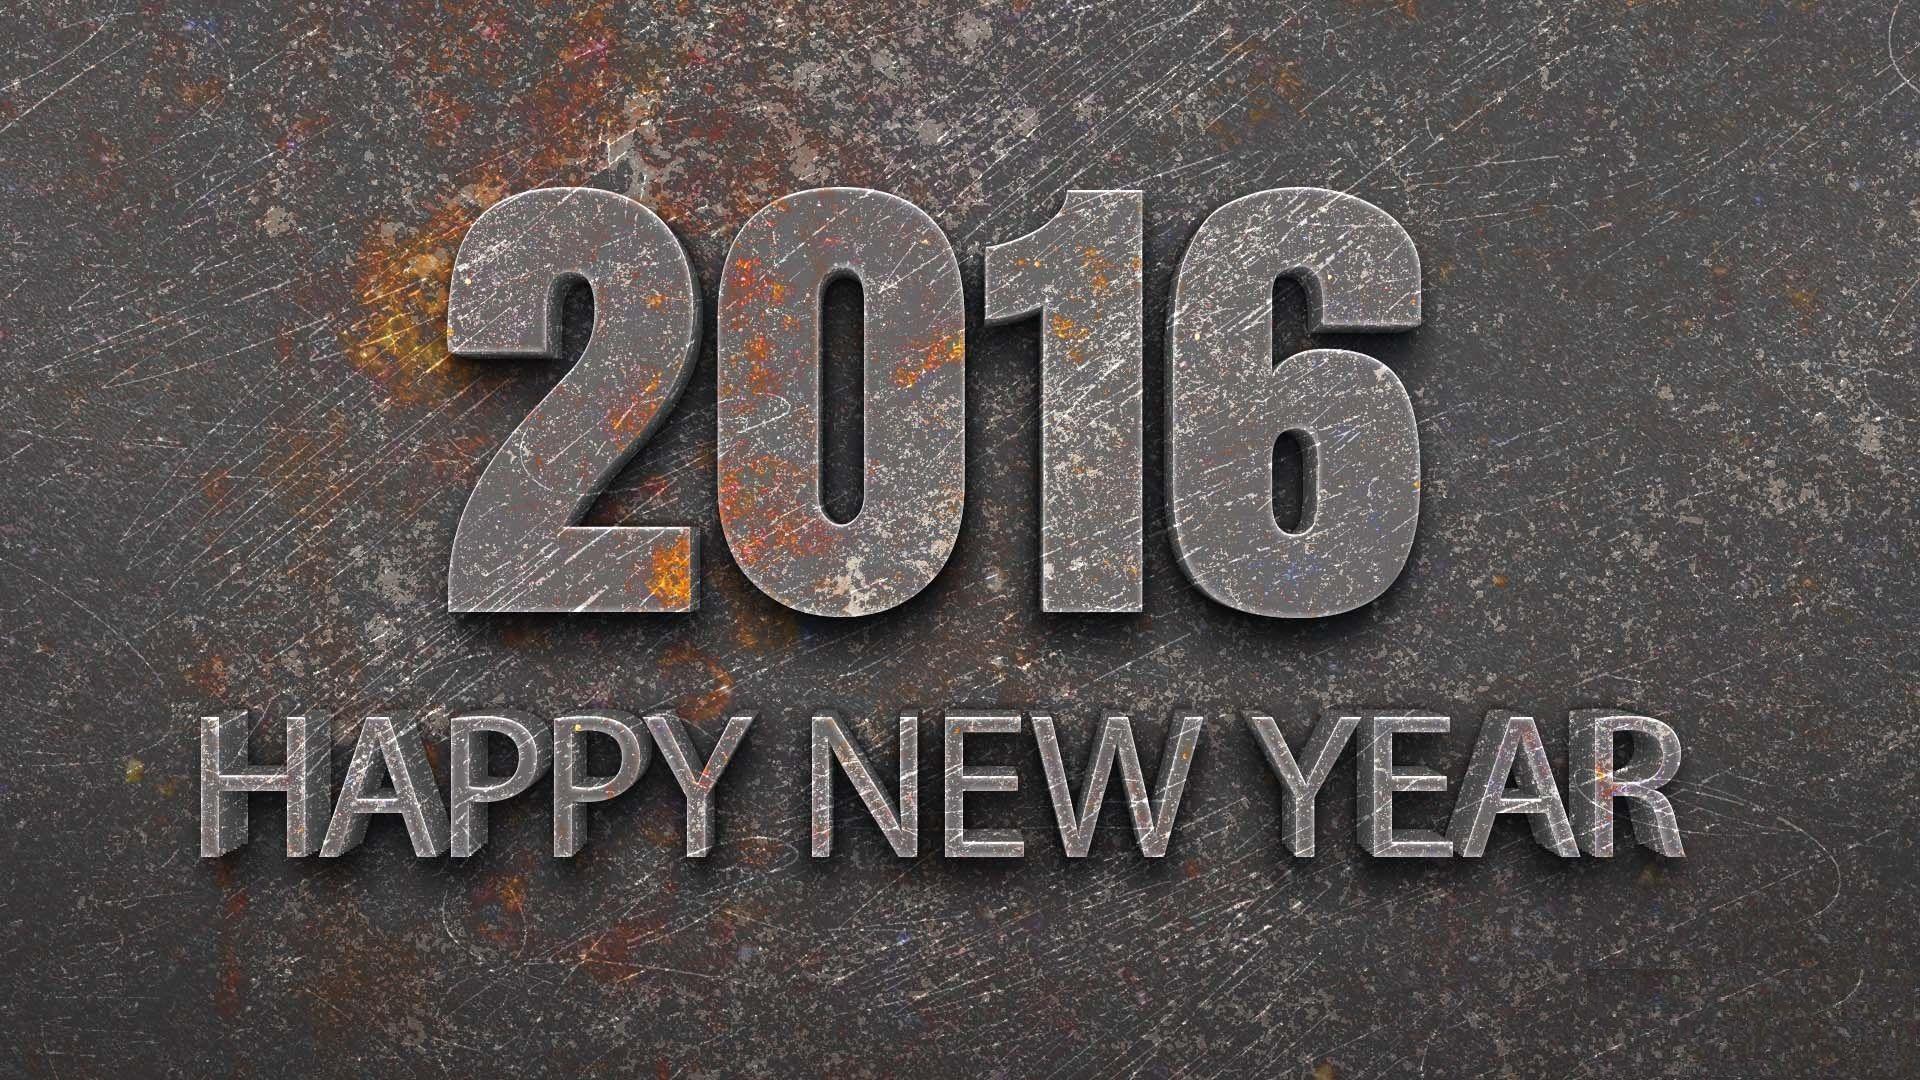 New Year 2016 Full HD Wallpaper and Background Imagex1080